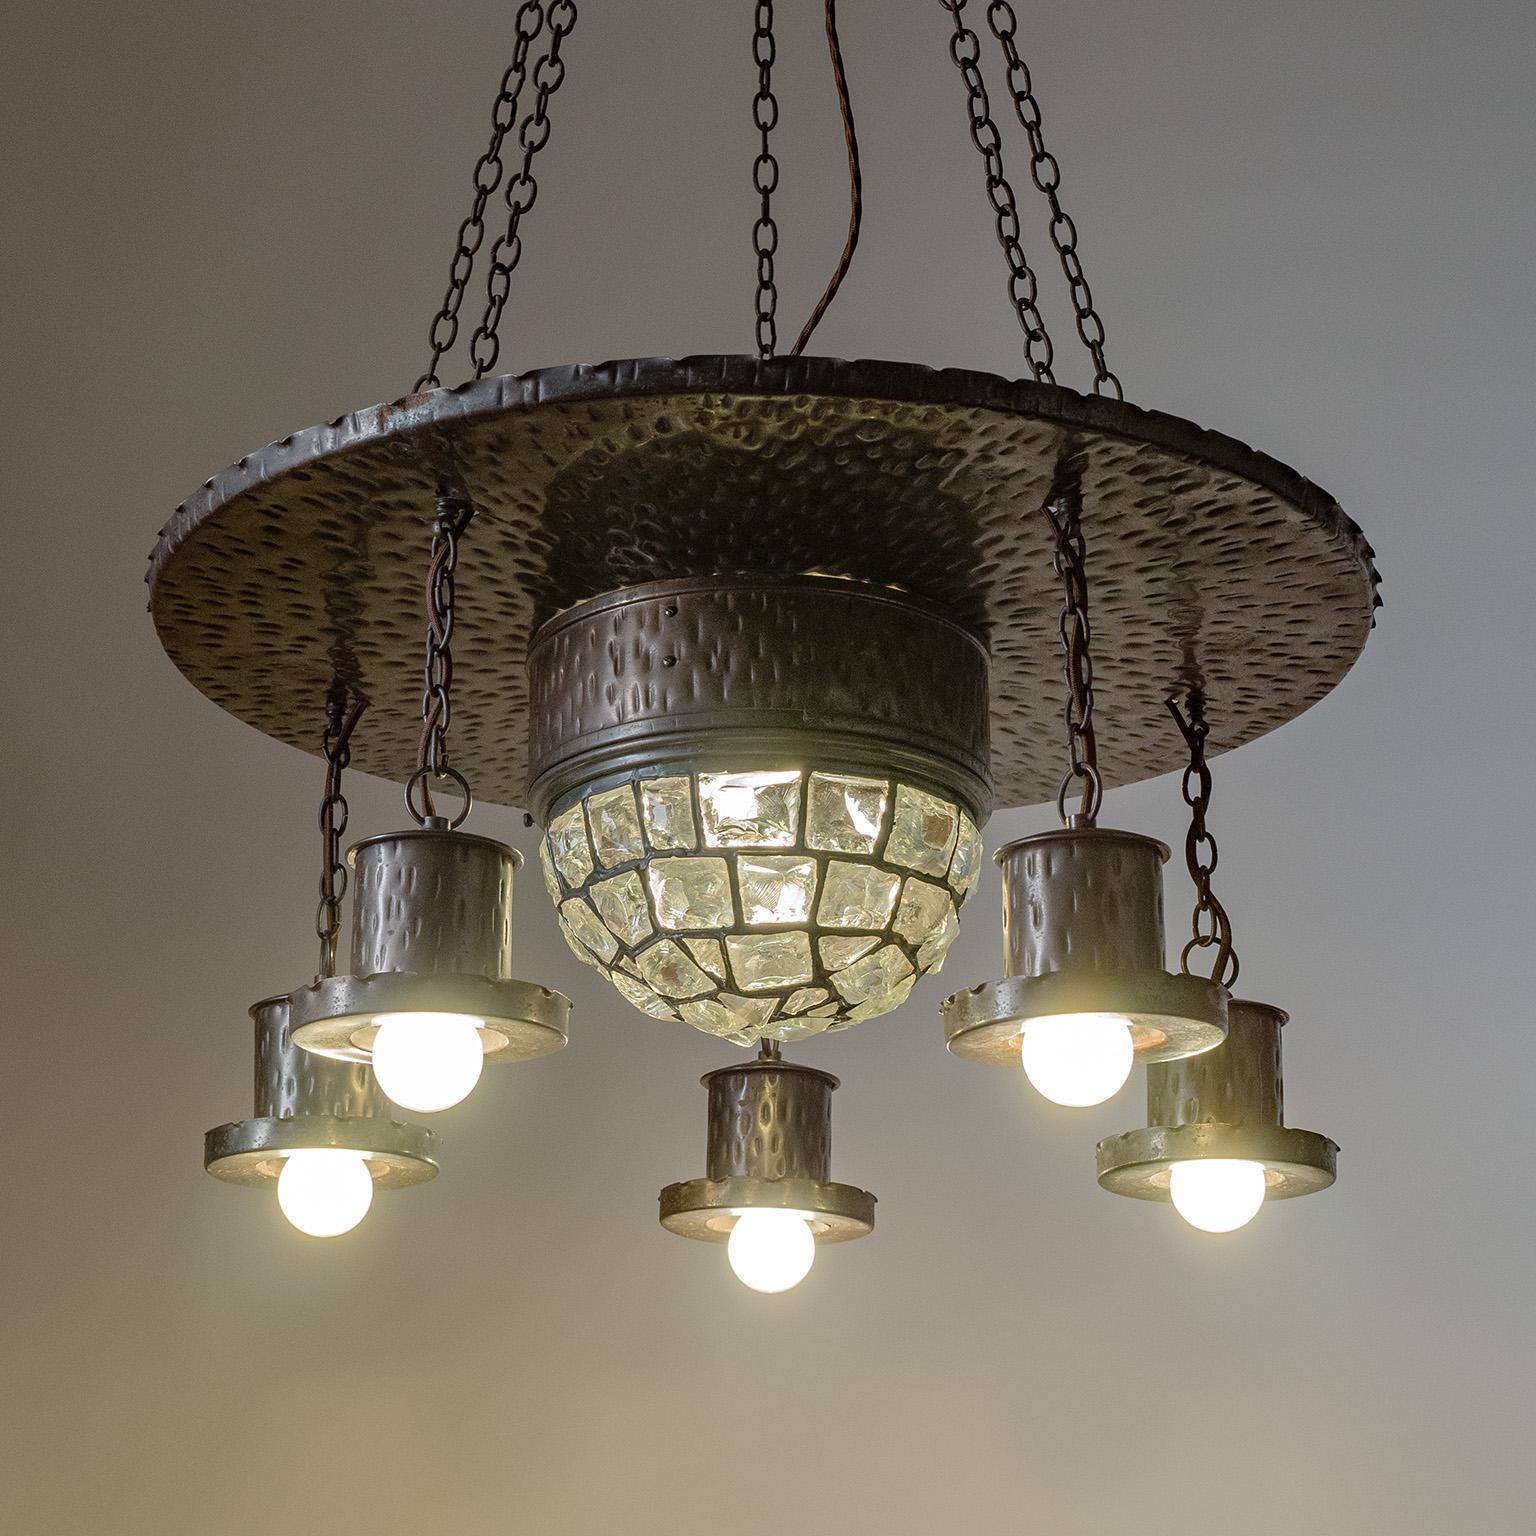 Plated Wrought Iron Suspension Chandelier, circa 1920 For Sale